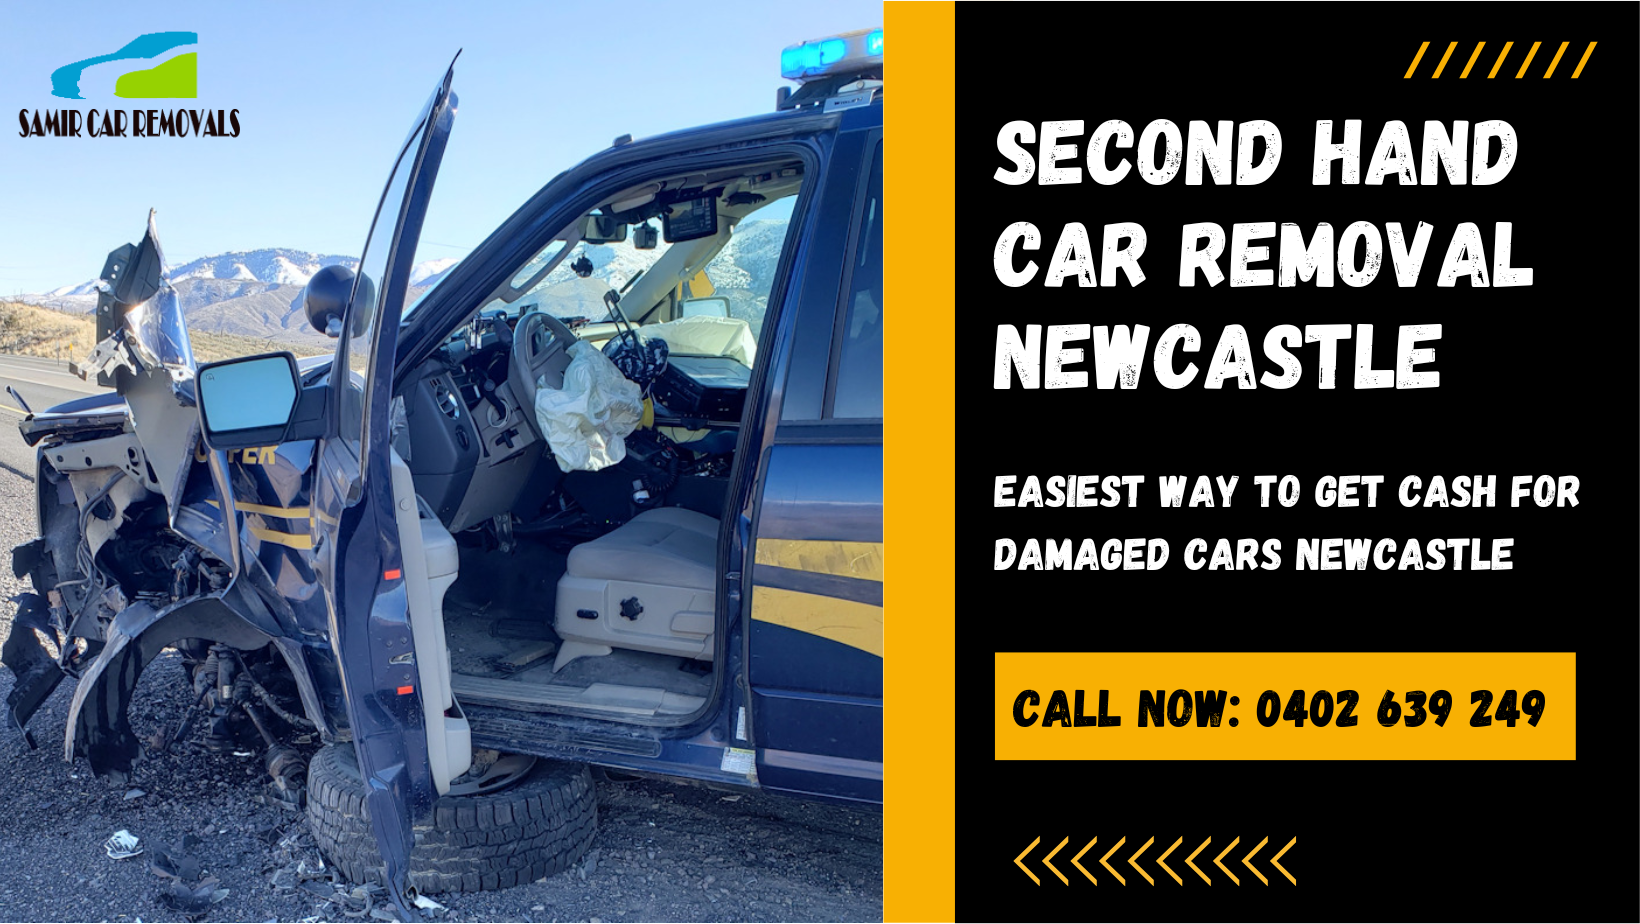 Easiest Way To Get Cash For Damaged Cars Newcastle